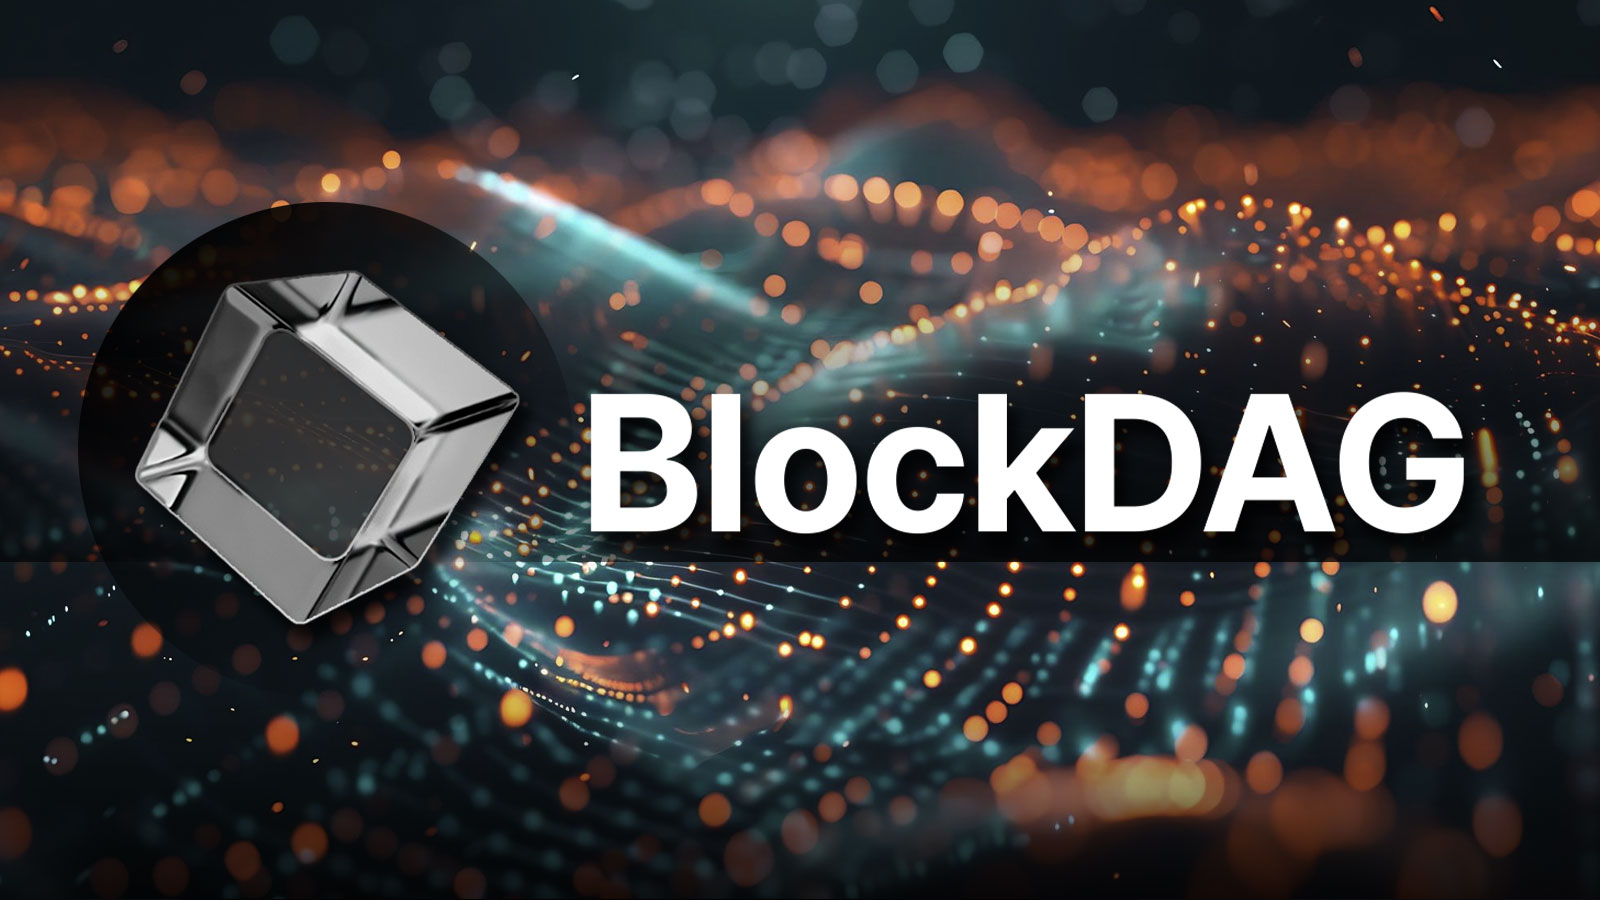 BlockDAG’s Forms New Targets by 2025, Ethereum and Solana Investors Getting Ready For Halving